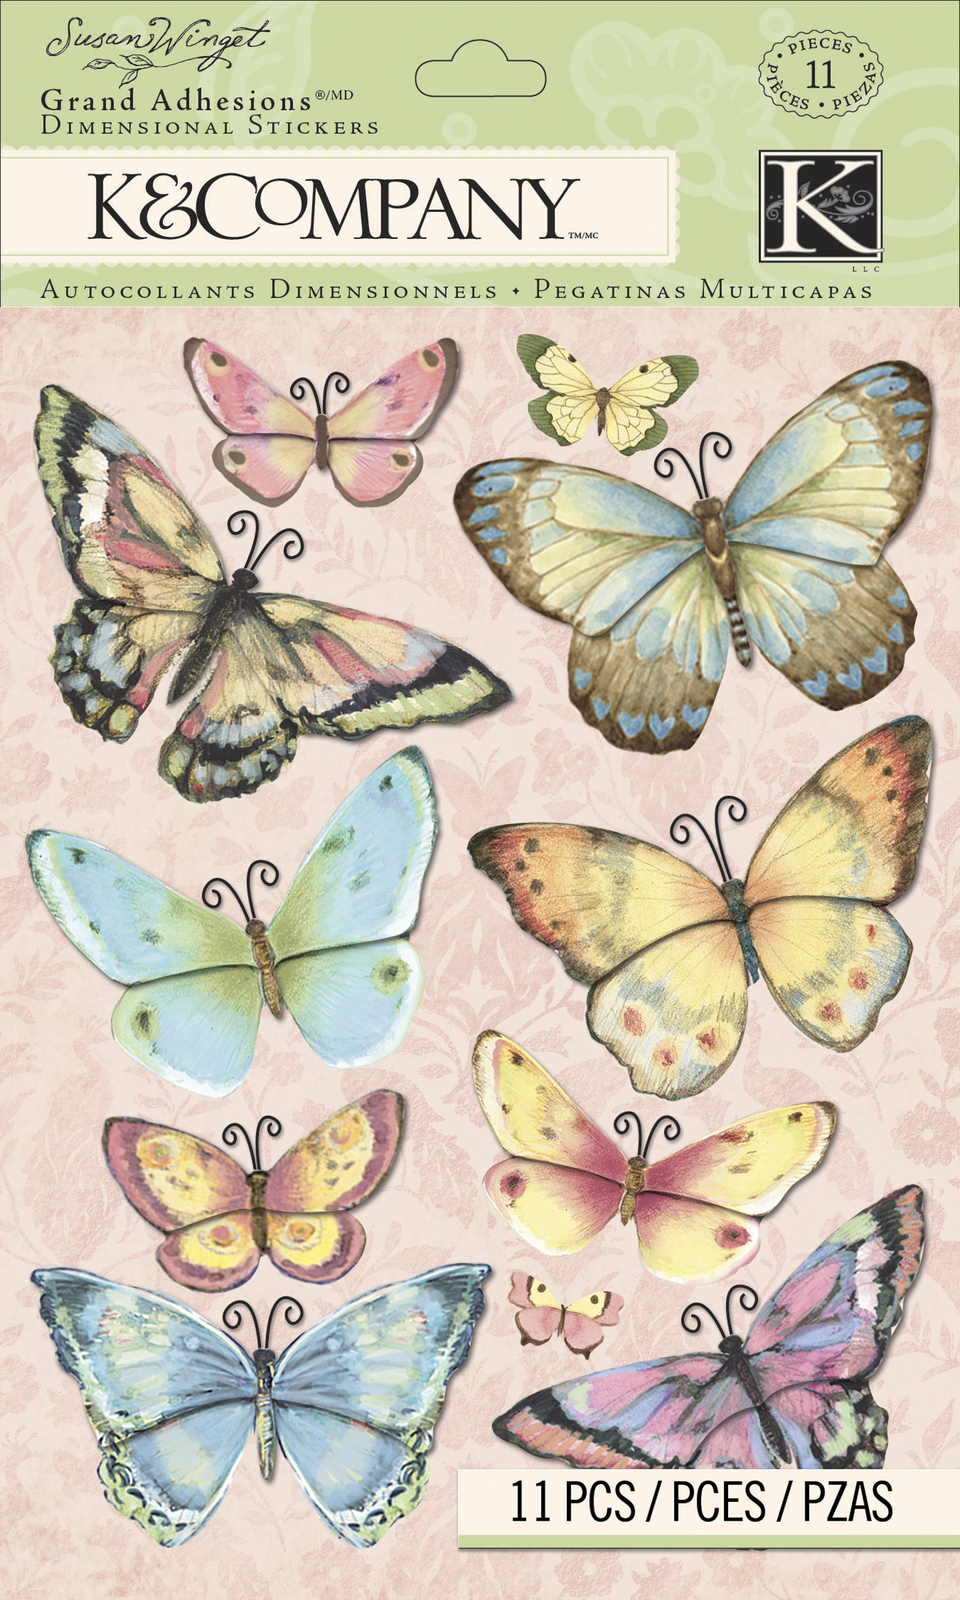 K&Company Floral Butterfly Grand Adhesions Sticker By Susan Winget - $23.62